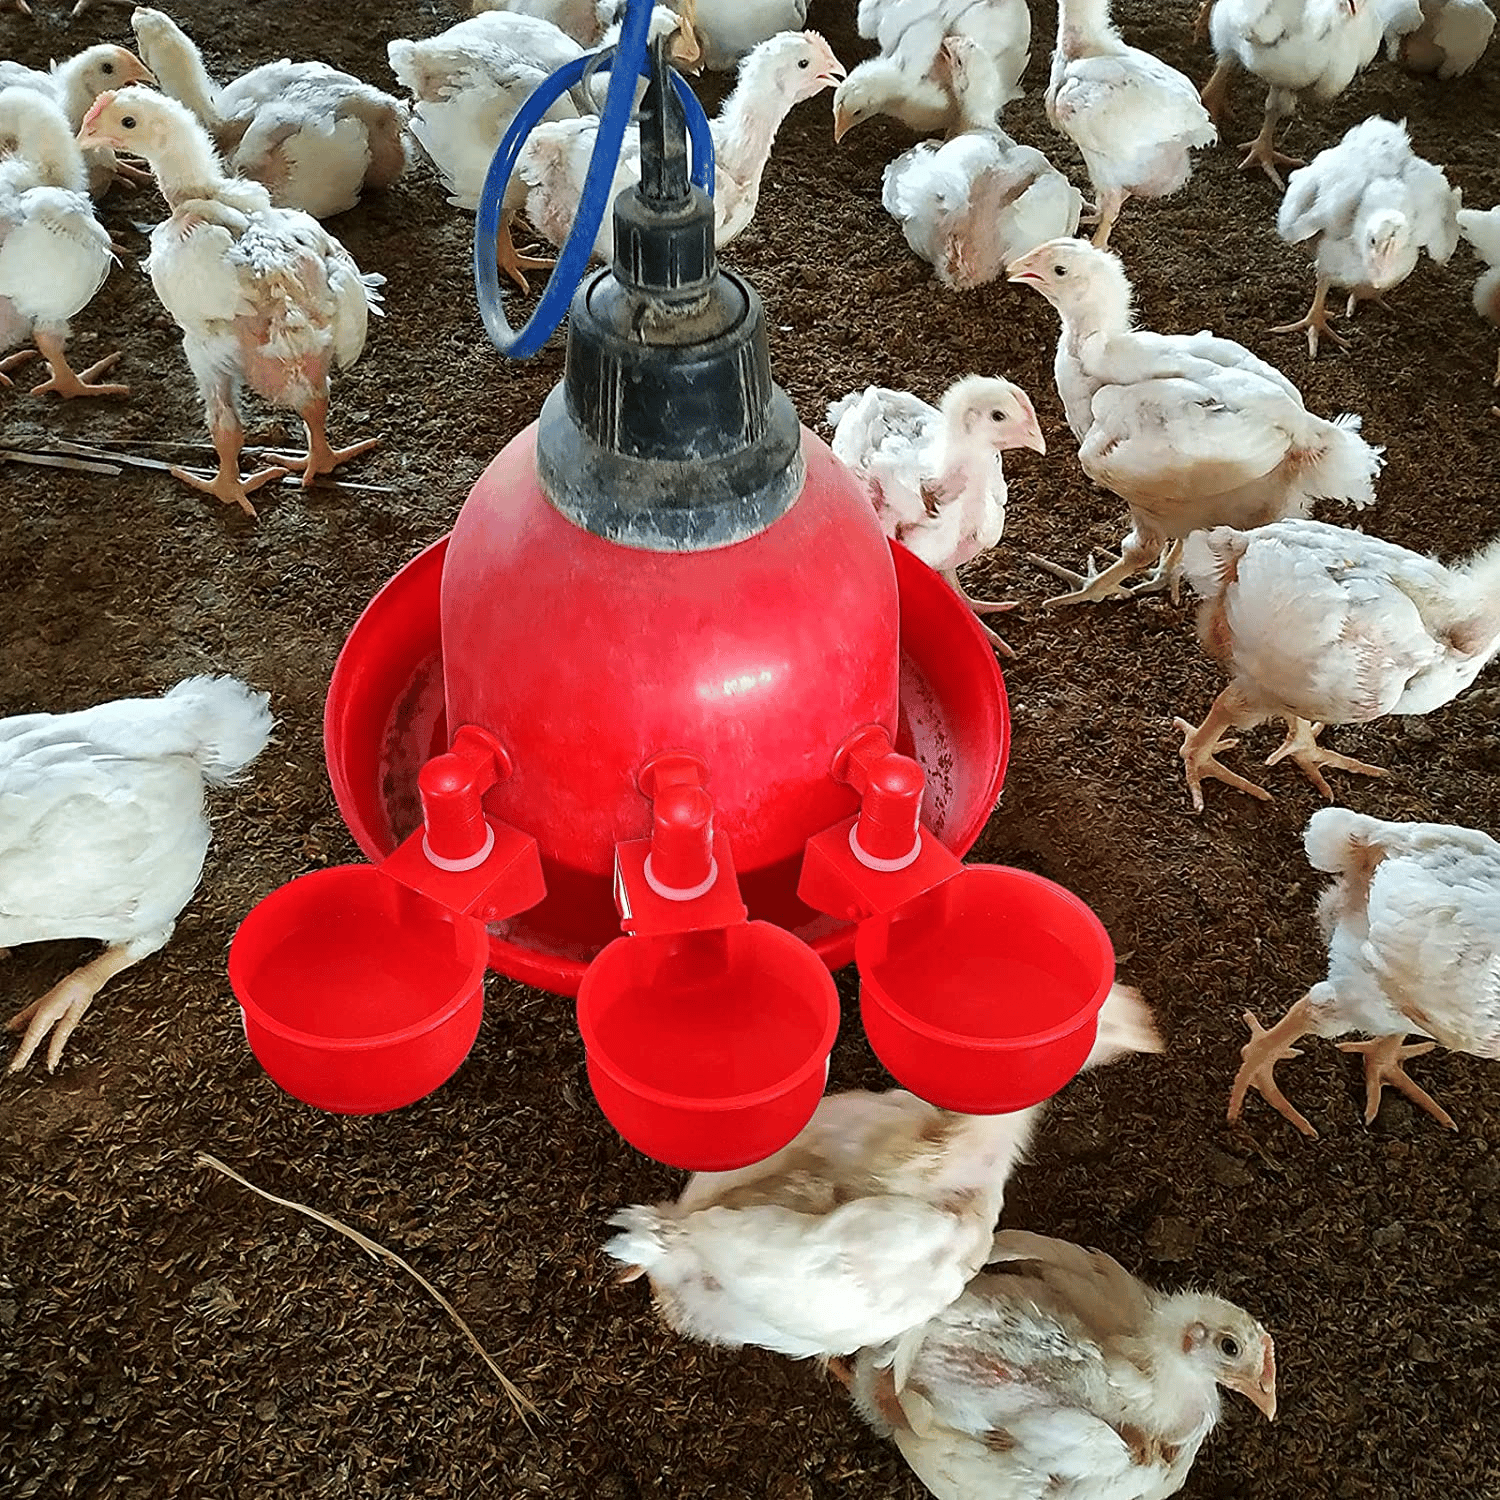 (⚡Flash Sale Today - 50% OFF) 6PCS/SET Automatic Poultry Drinking Bowl